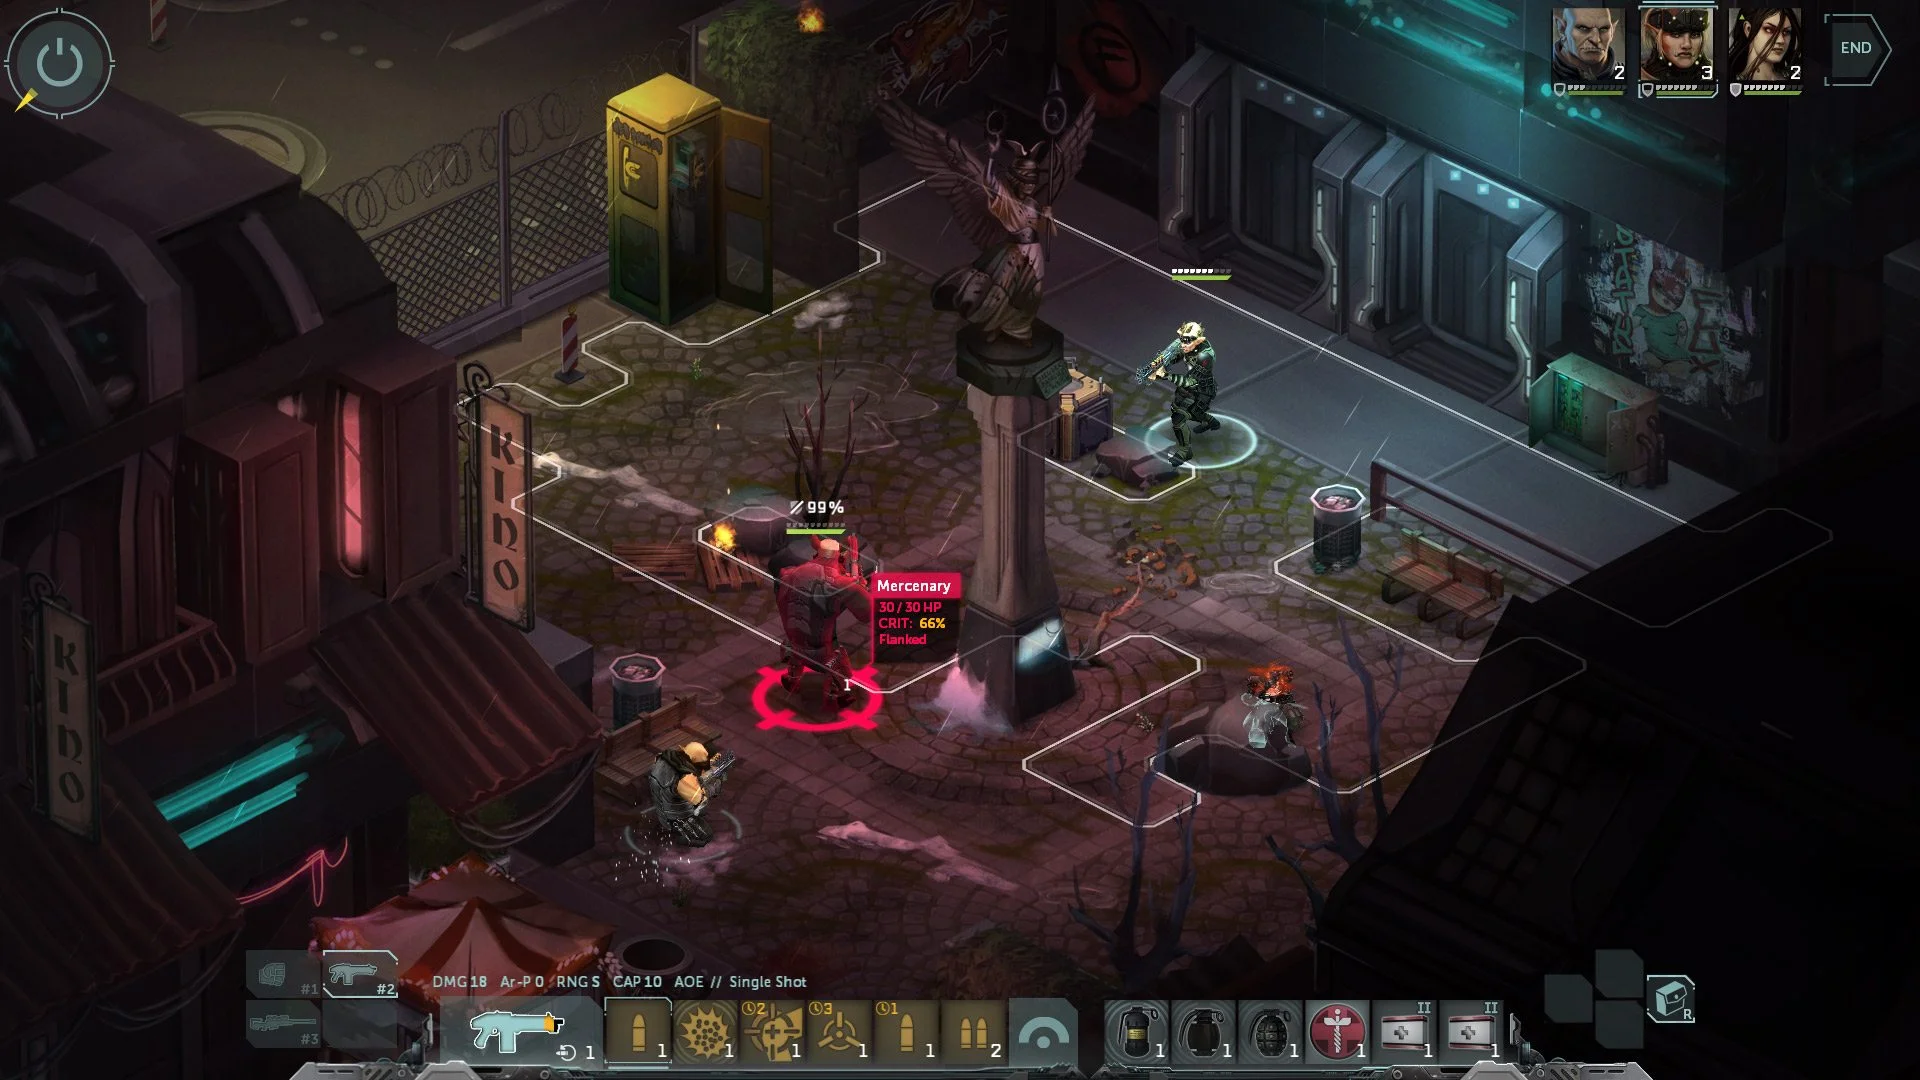 Highly Rated iOS Role-Playing Game 'Aralon' is Free for Limited Time -  MacRumors